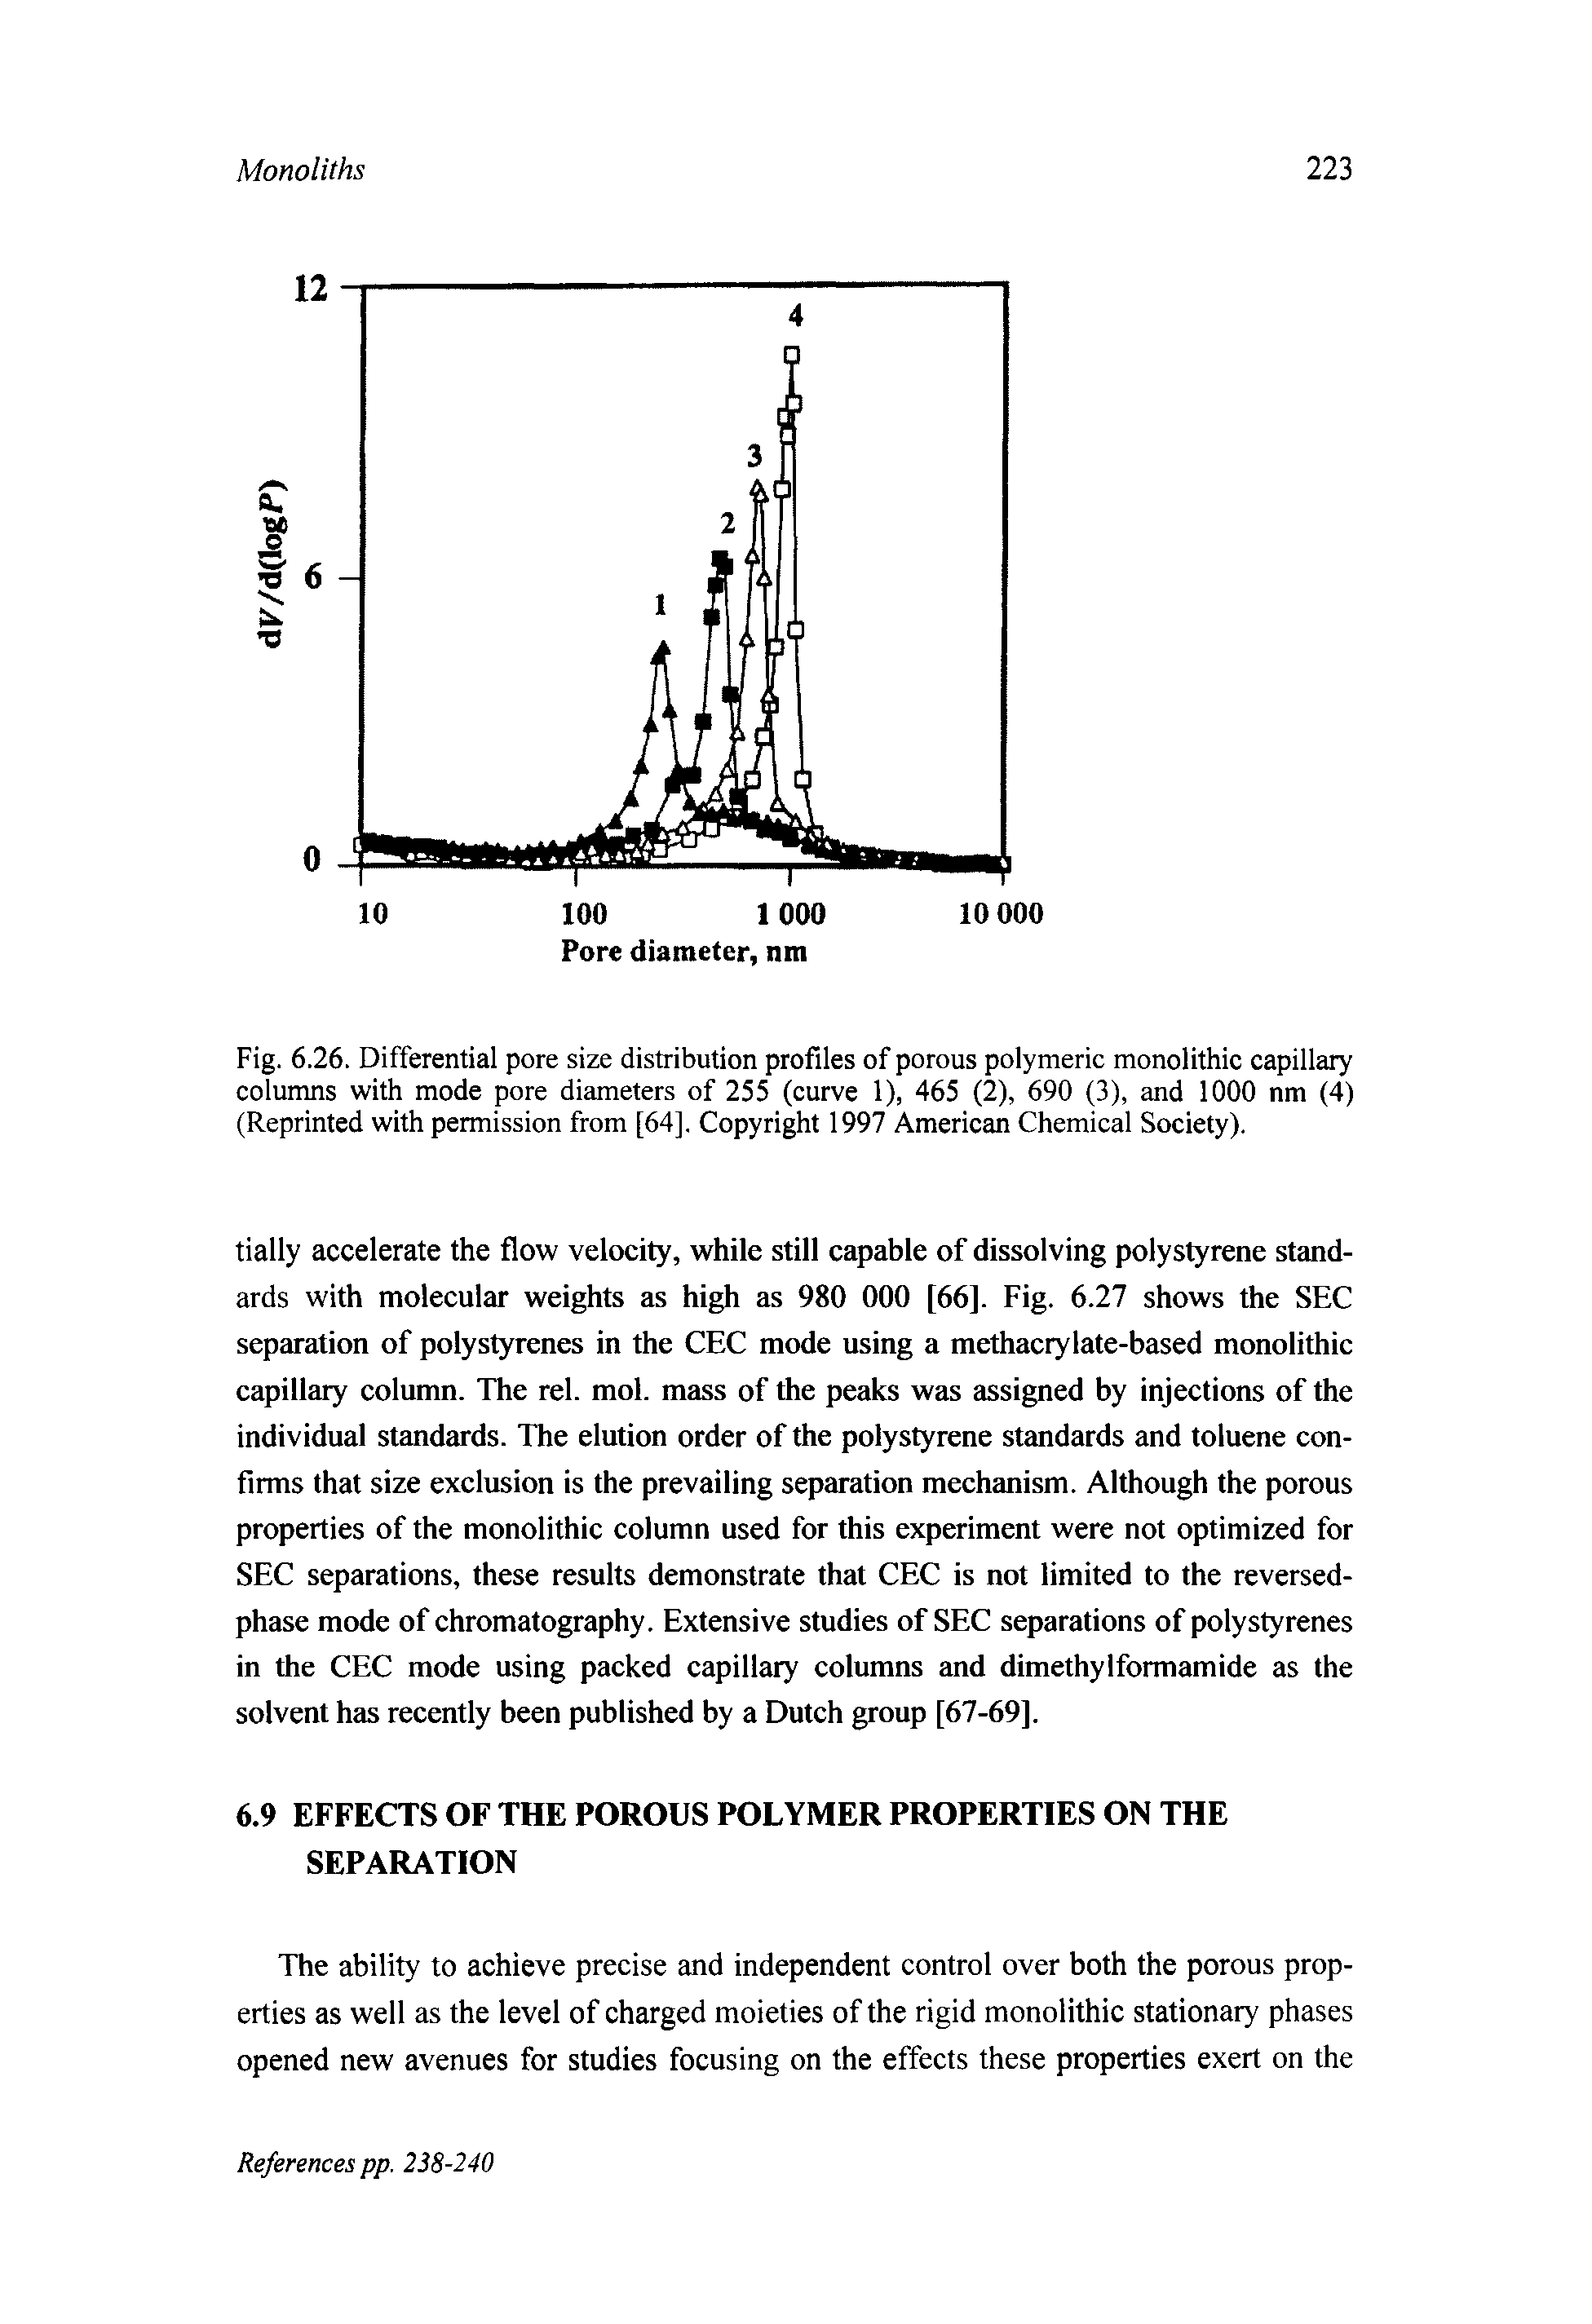 Fig. 6.26. Differential pore size distribution profiles of porous polymeric monolithic capillary columns with mode pore diameters of 255 (curve 1), 465 (2), 690 (3), and 1000 nm (4) (Reprinted with permission from [64]. Copyright 1997 American Chemical Society).